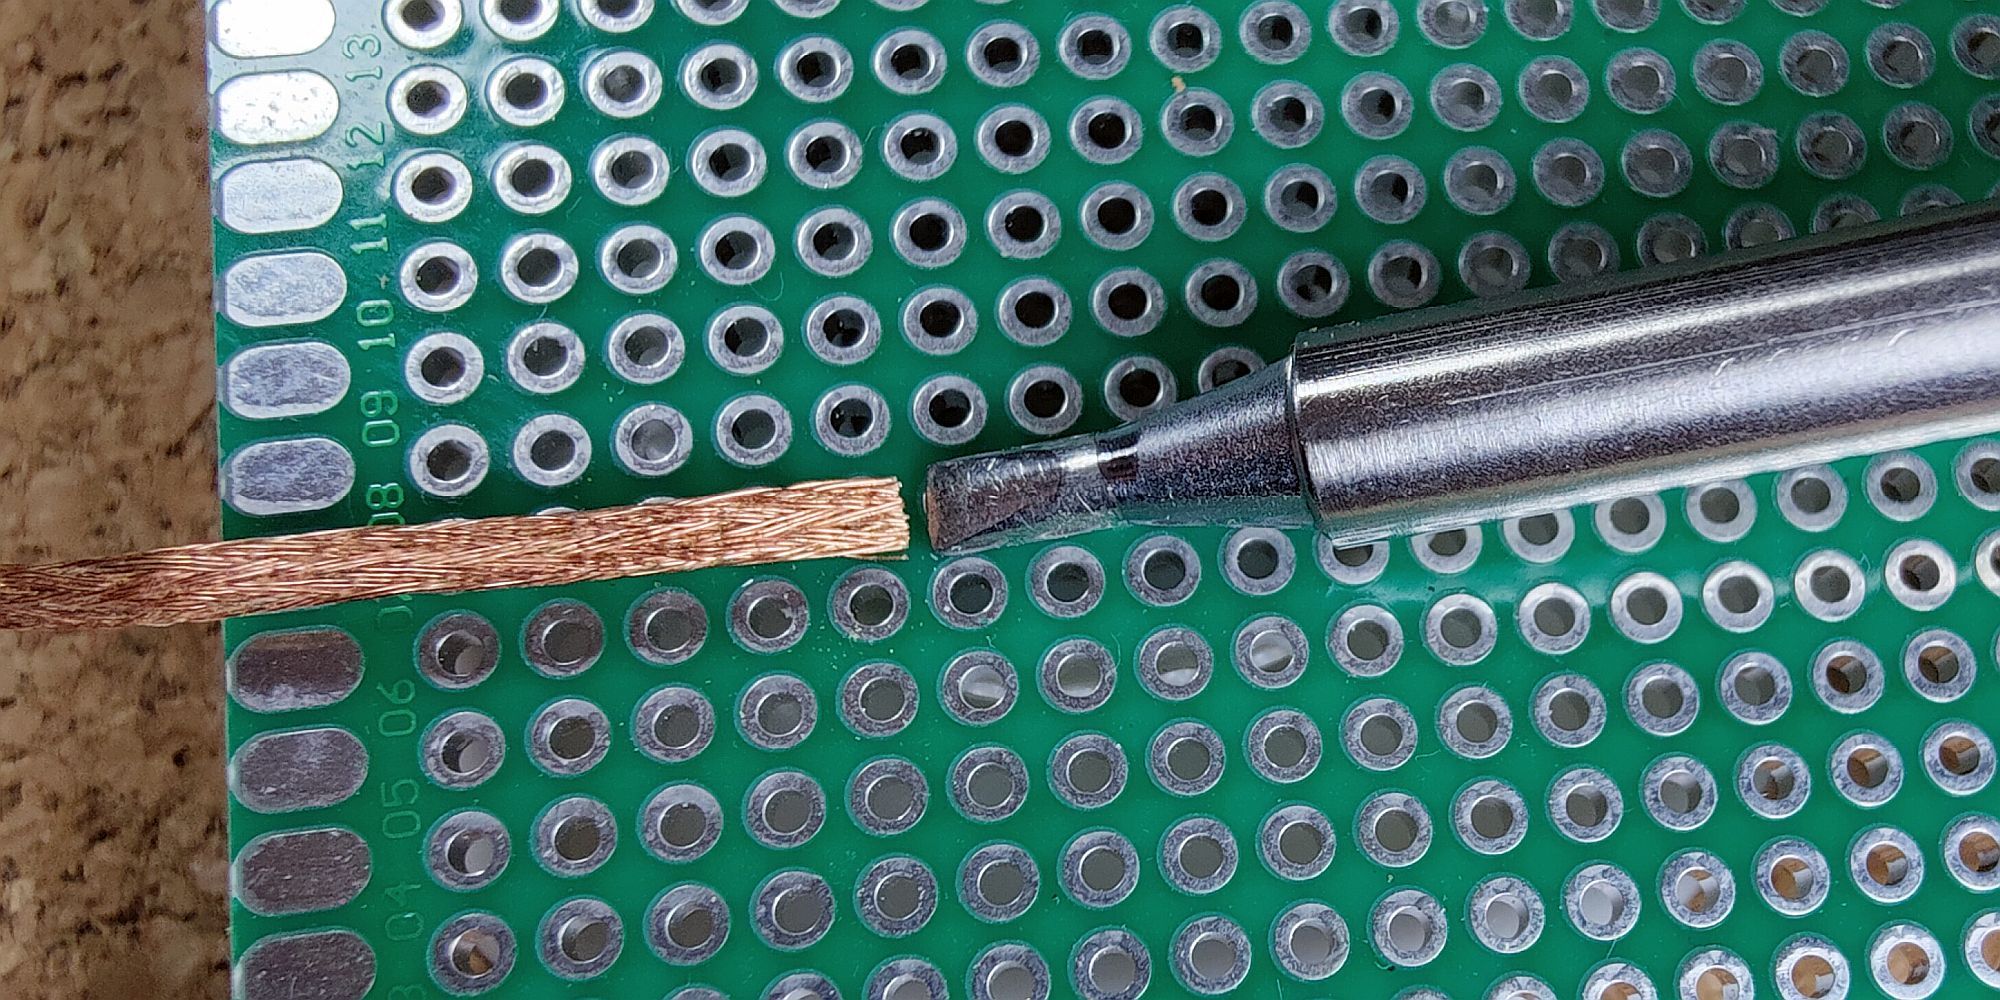 dMatched desoldering braid and soldering iron tip